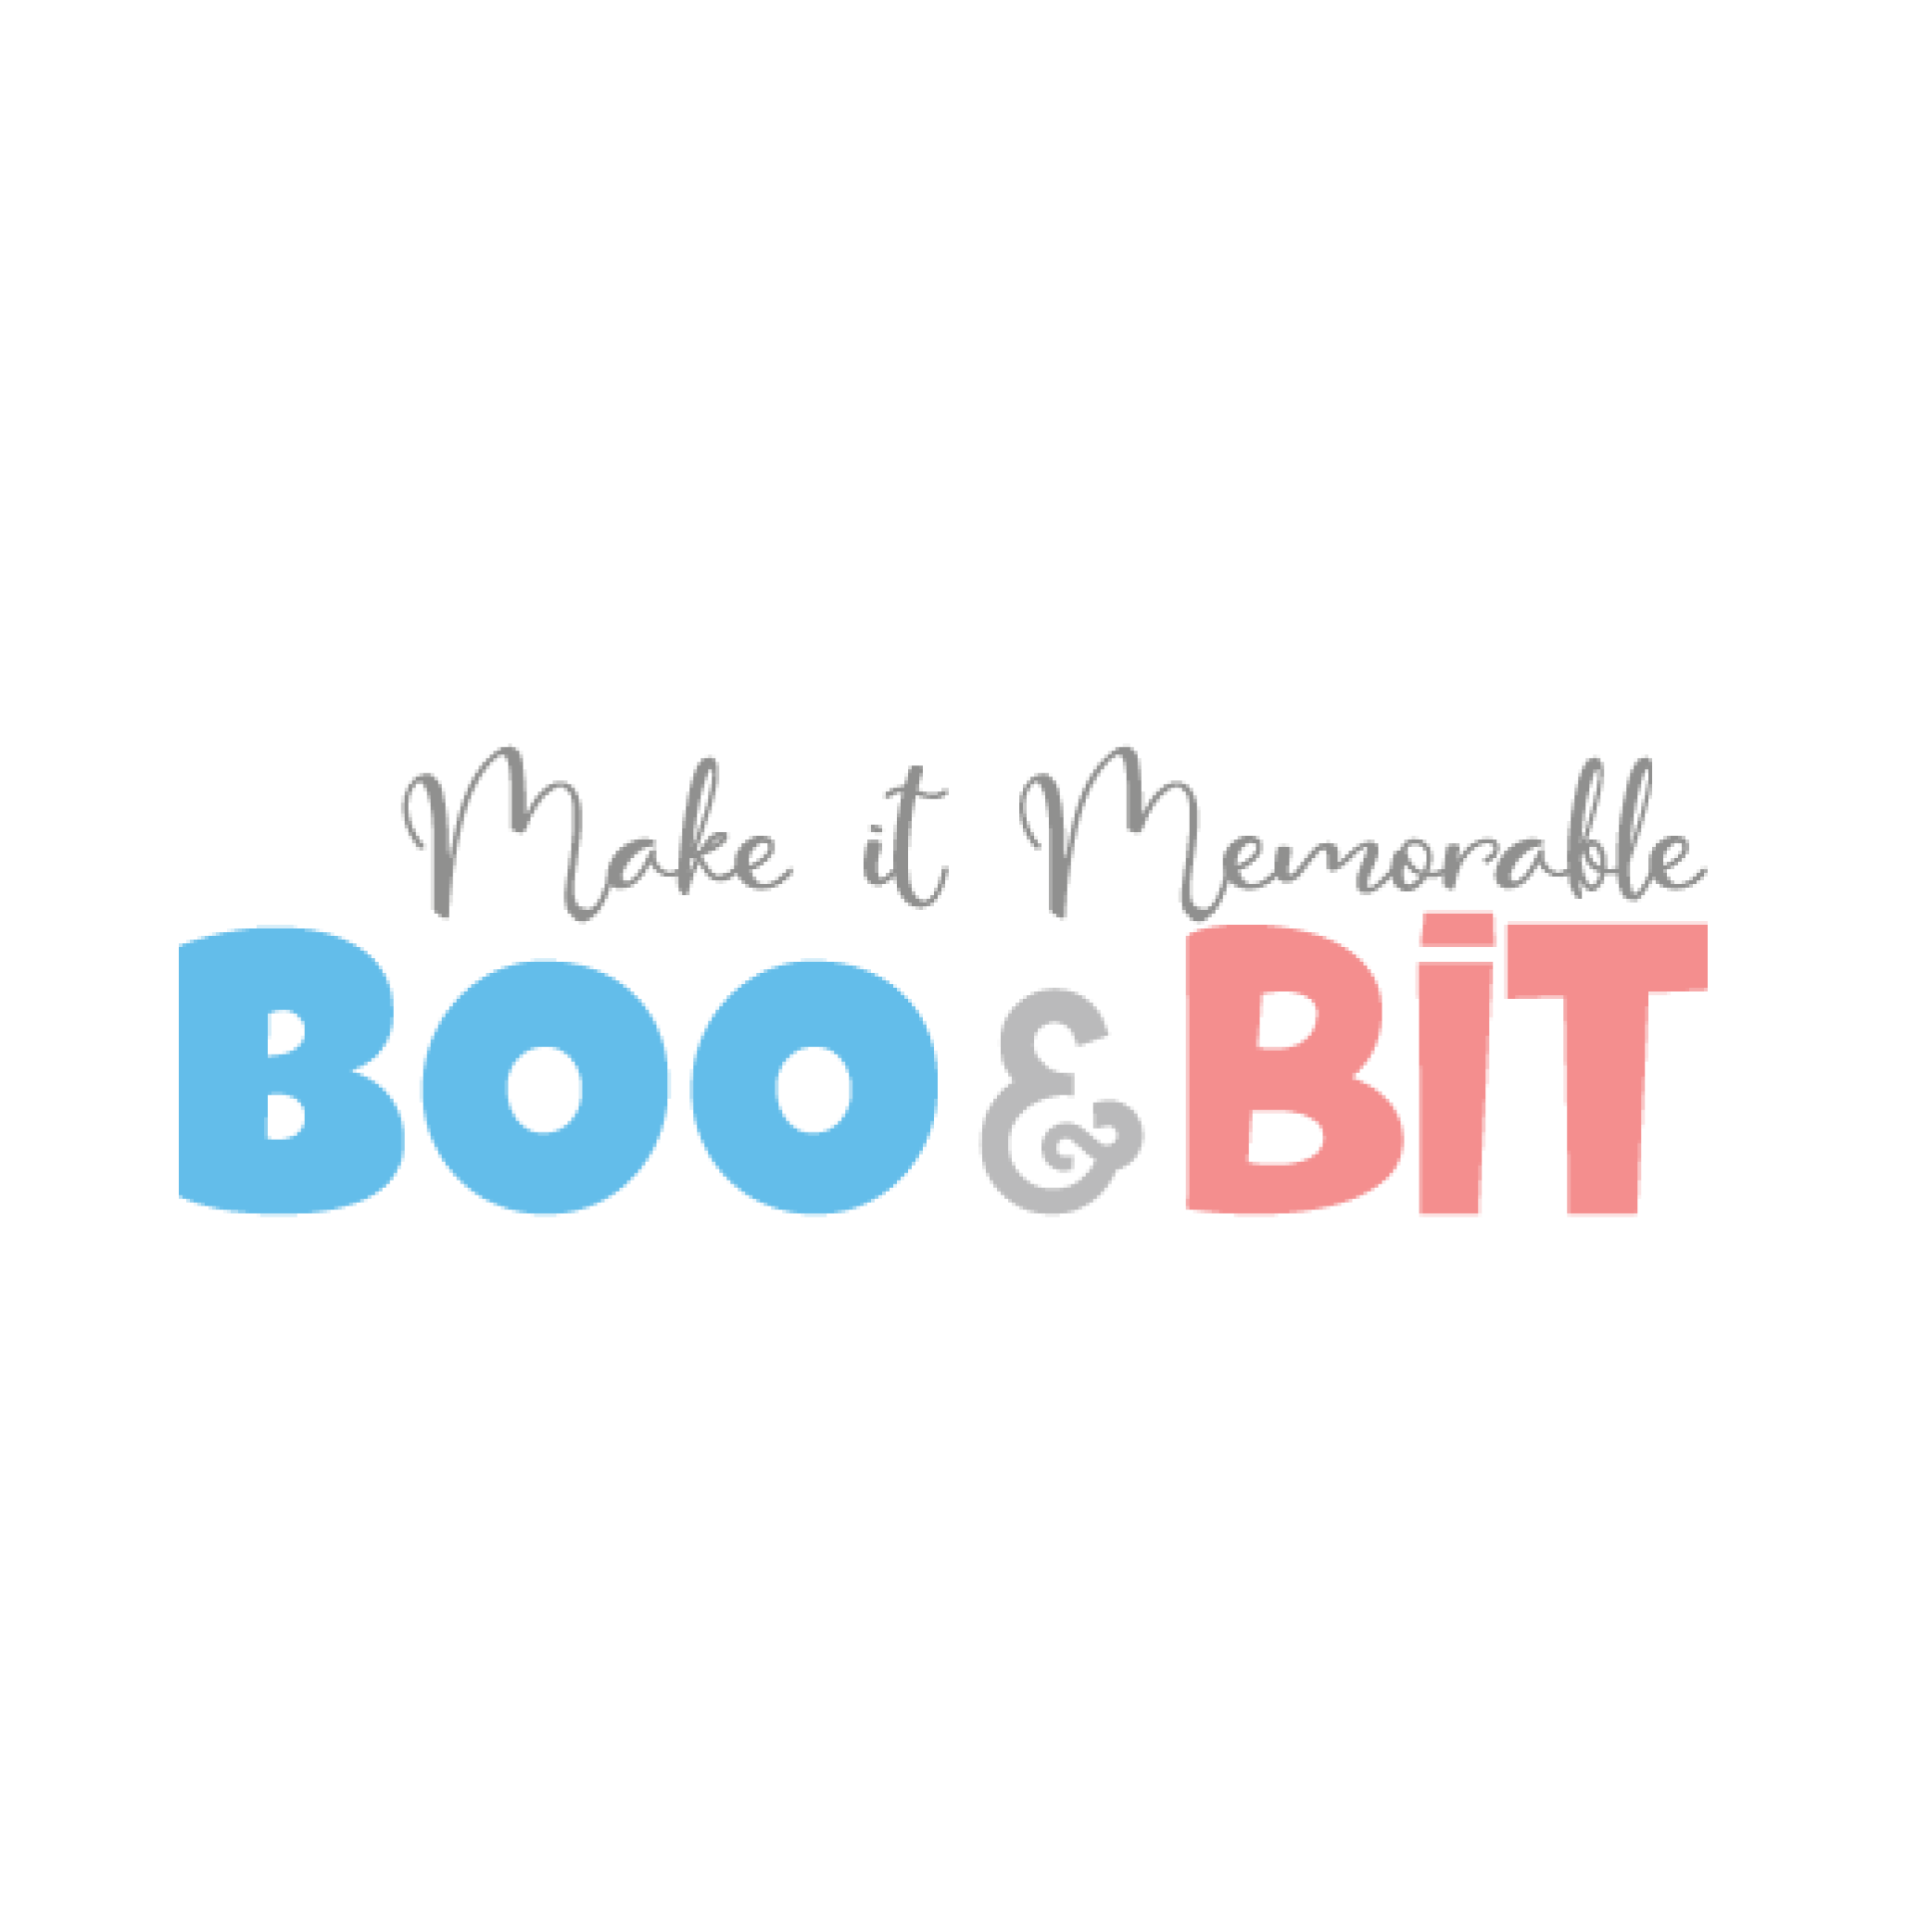 Boo and Bit